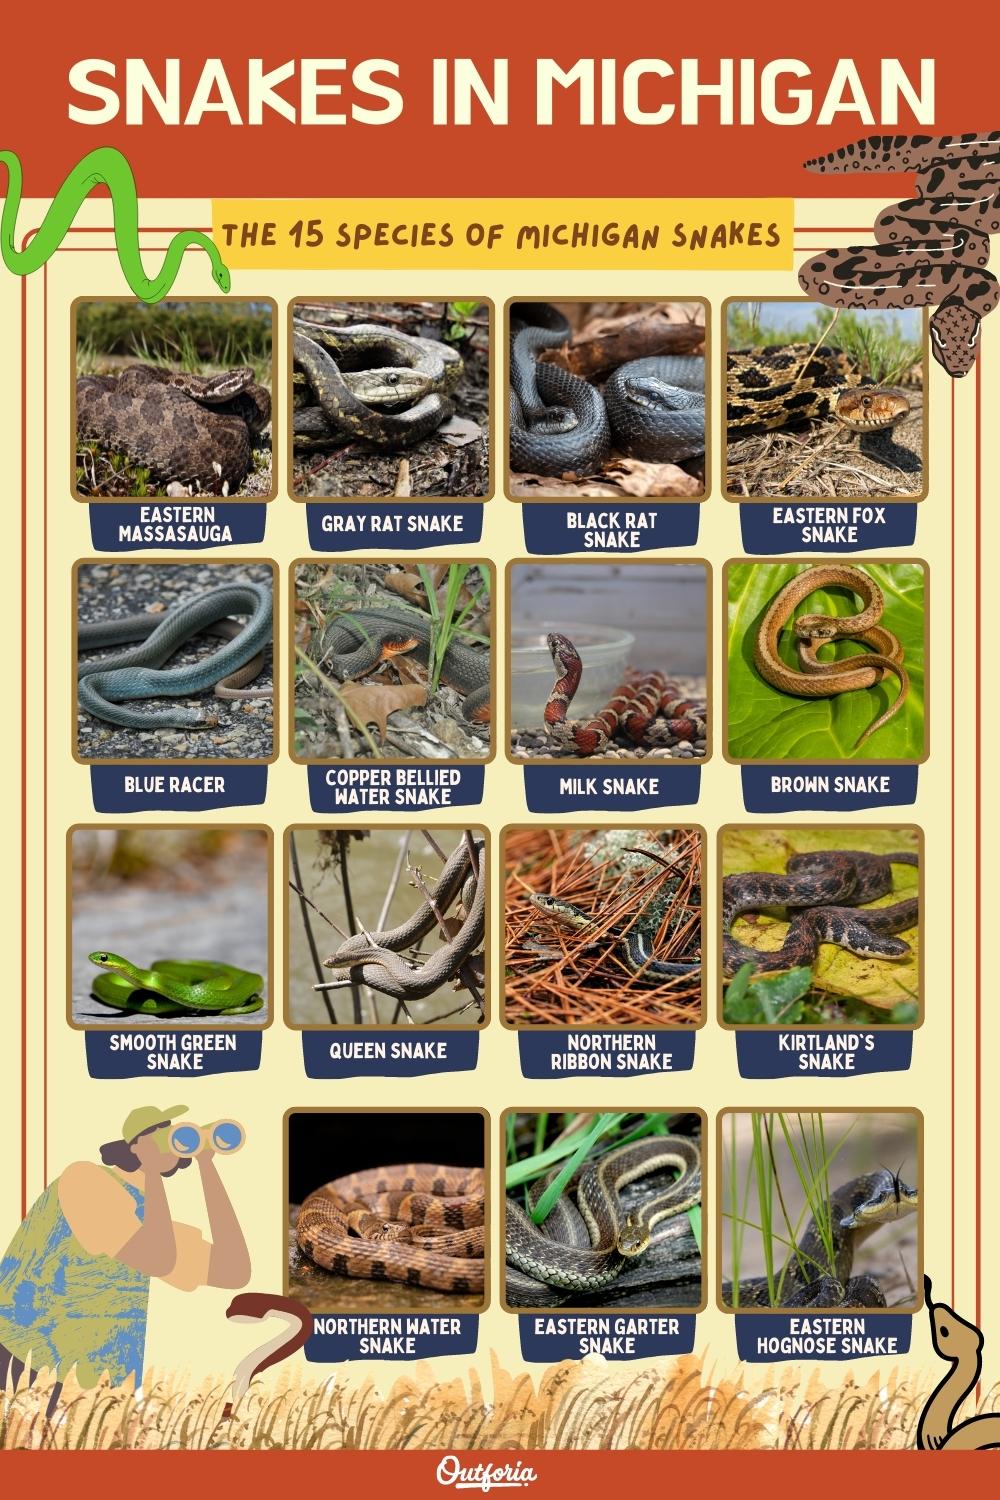 chart of the names and images of snakes in Michigan